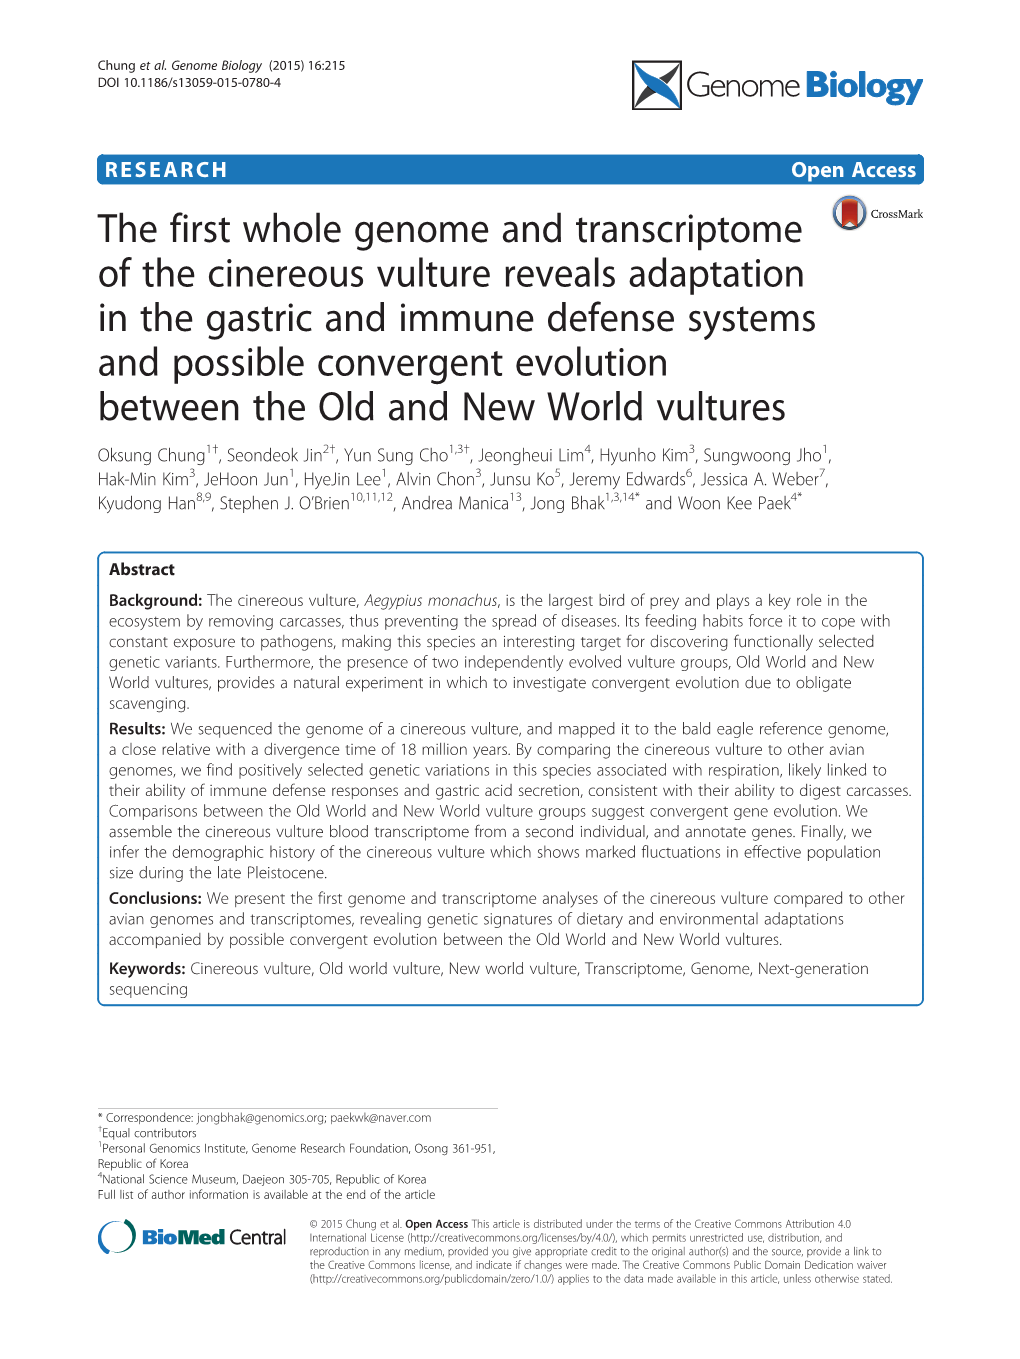 The First Whole Genome and Transcriptome of the Cinereous Vulture Reveals Adaptation in the Gastric and Immune Defense Systems A